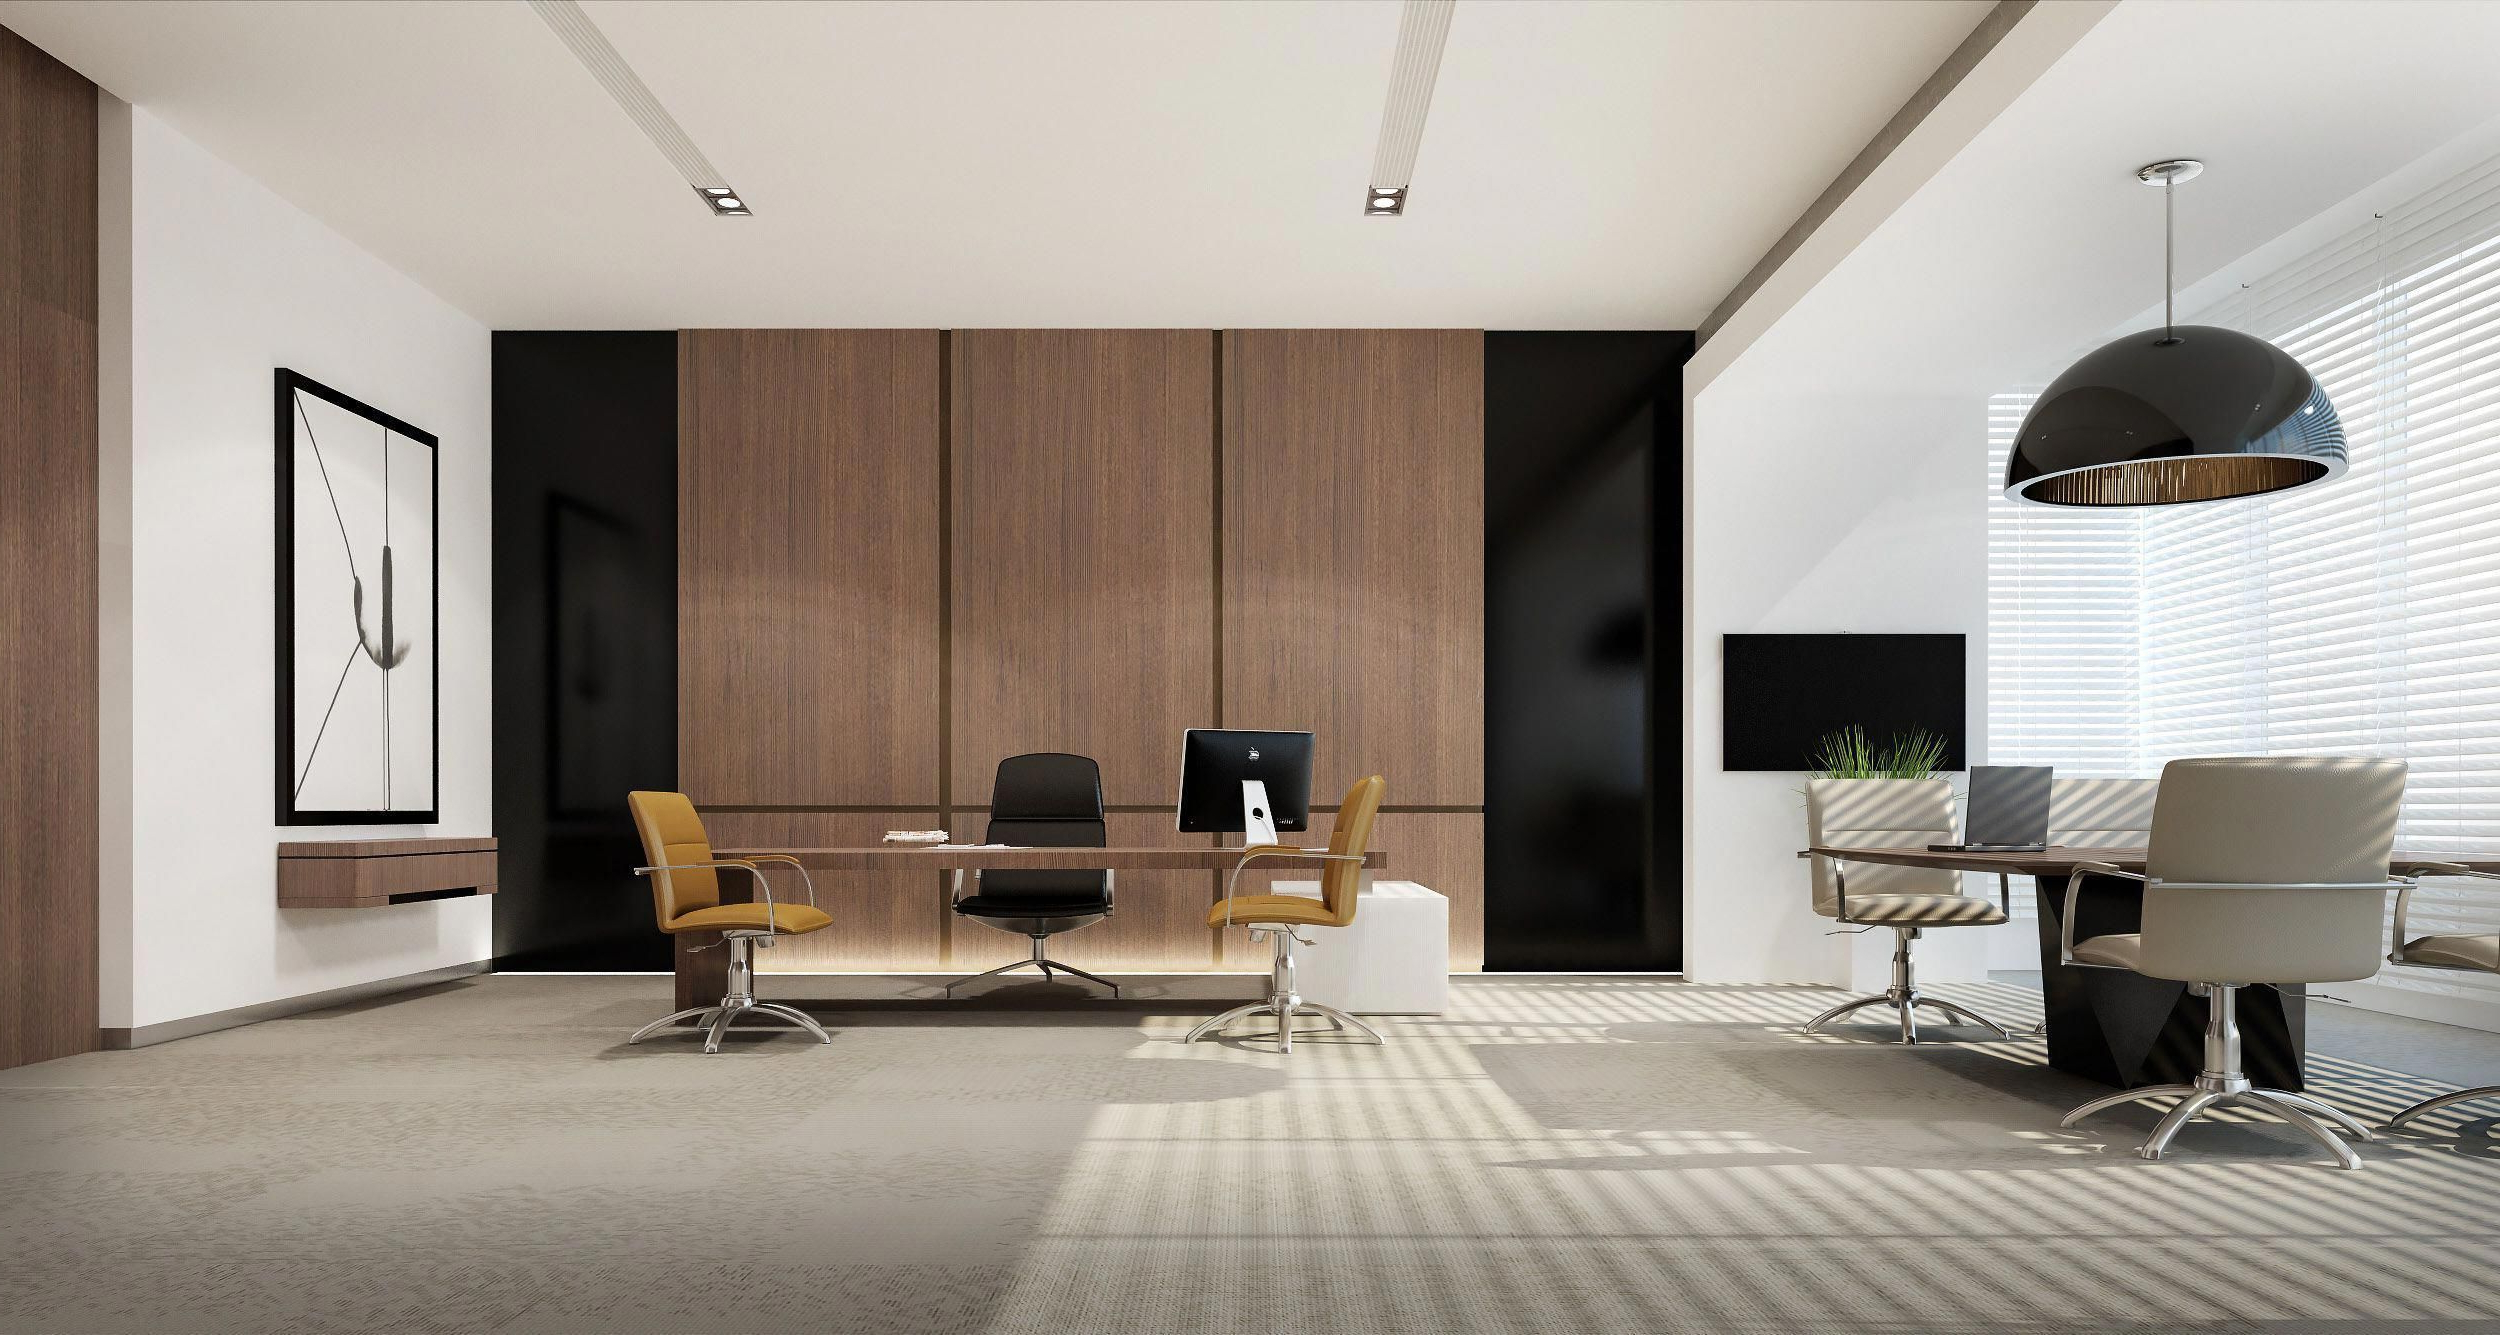 Incredible Founder Us Room Director Floor Wall Finishes Picture Of Modern Ceo Office Interior